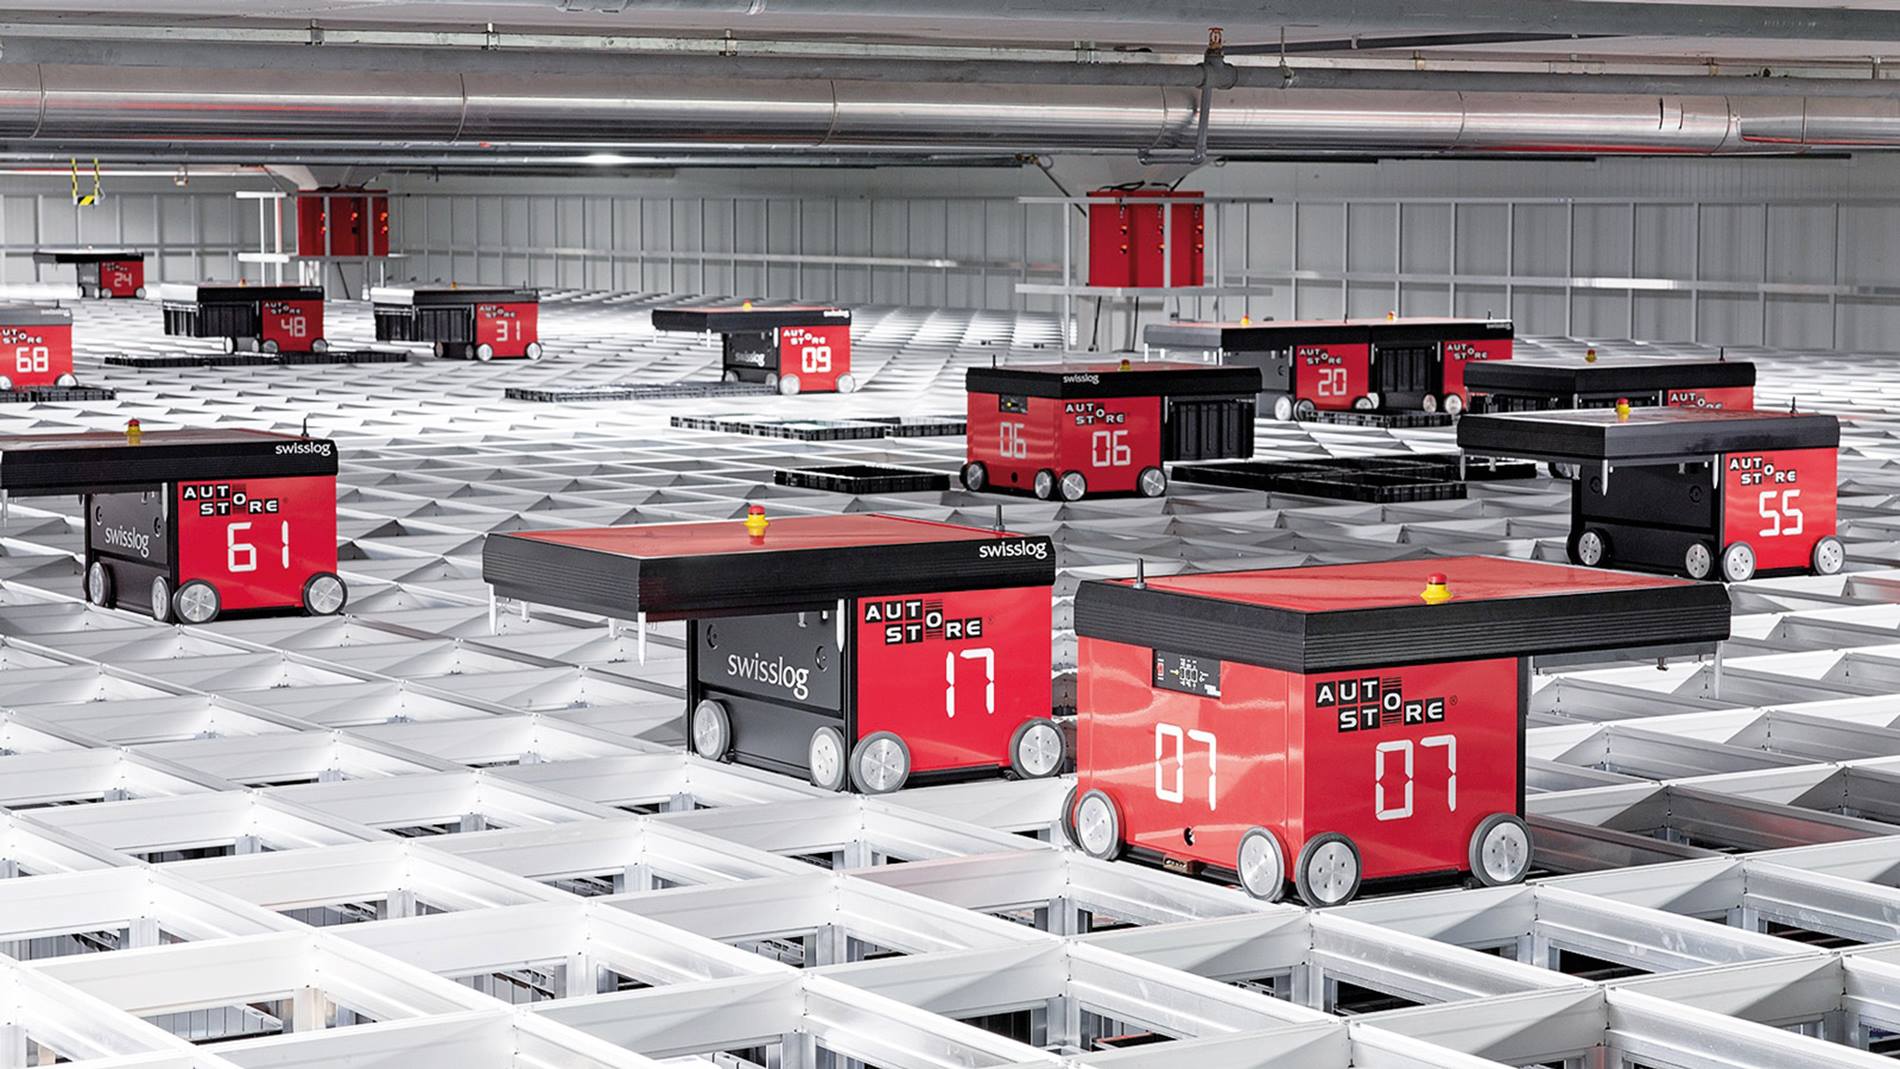 AutoStore a space saving automated storage and picking system